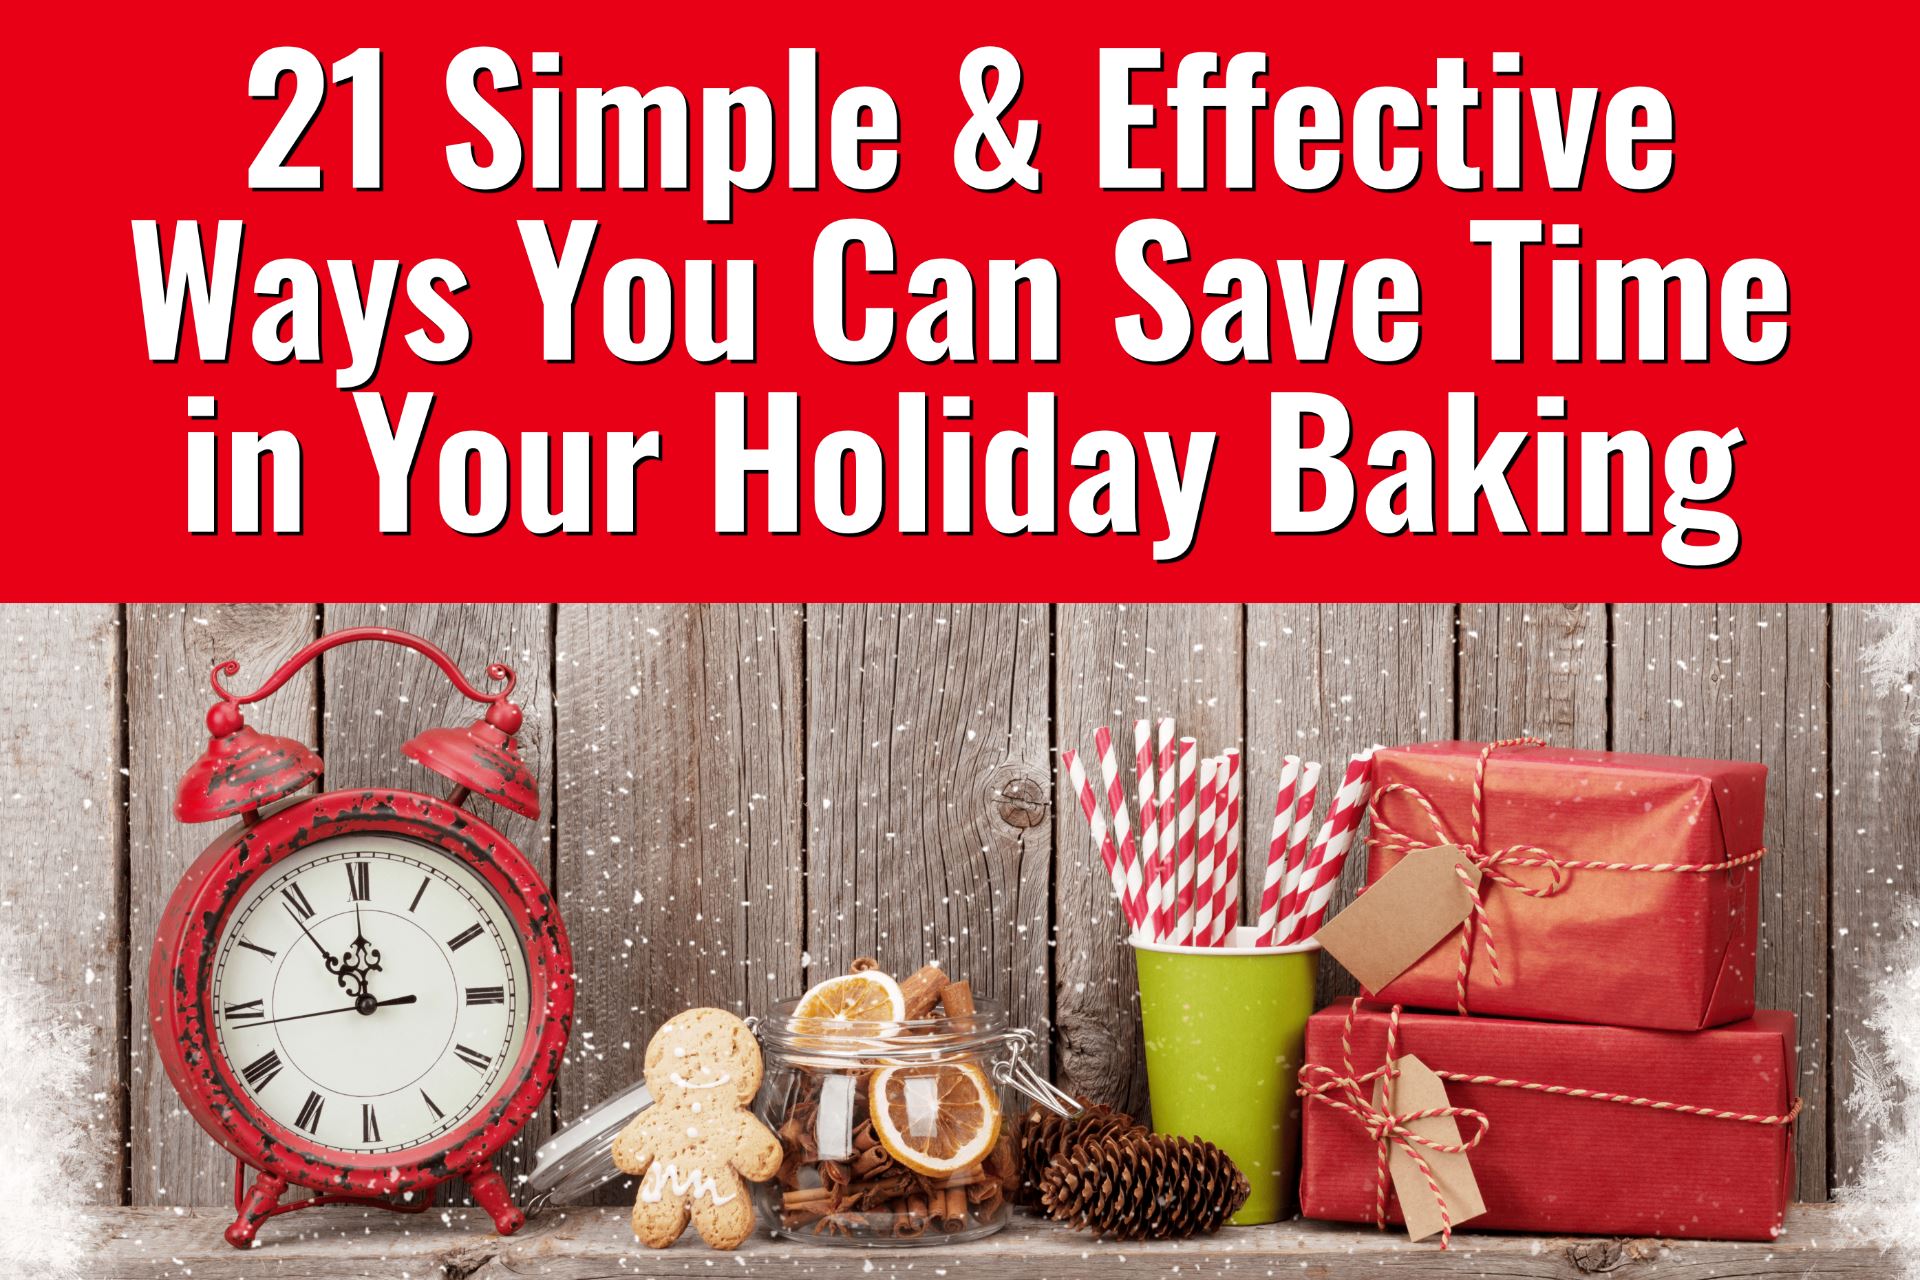 21 Simple & Effective Ways You Can Save Time in Your Holiday Baking